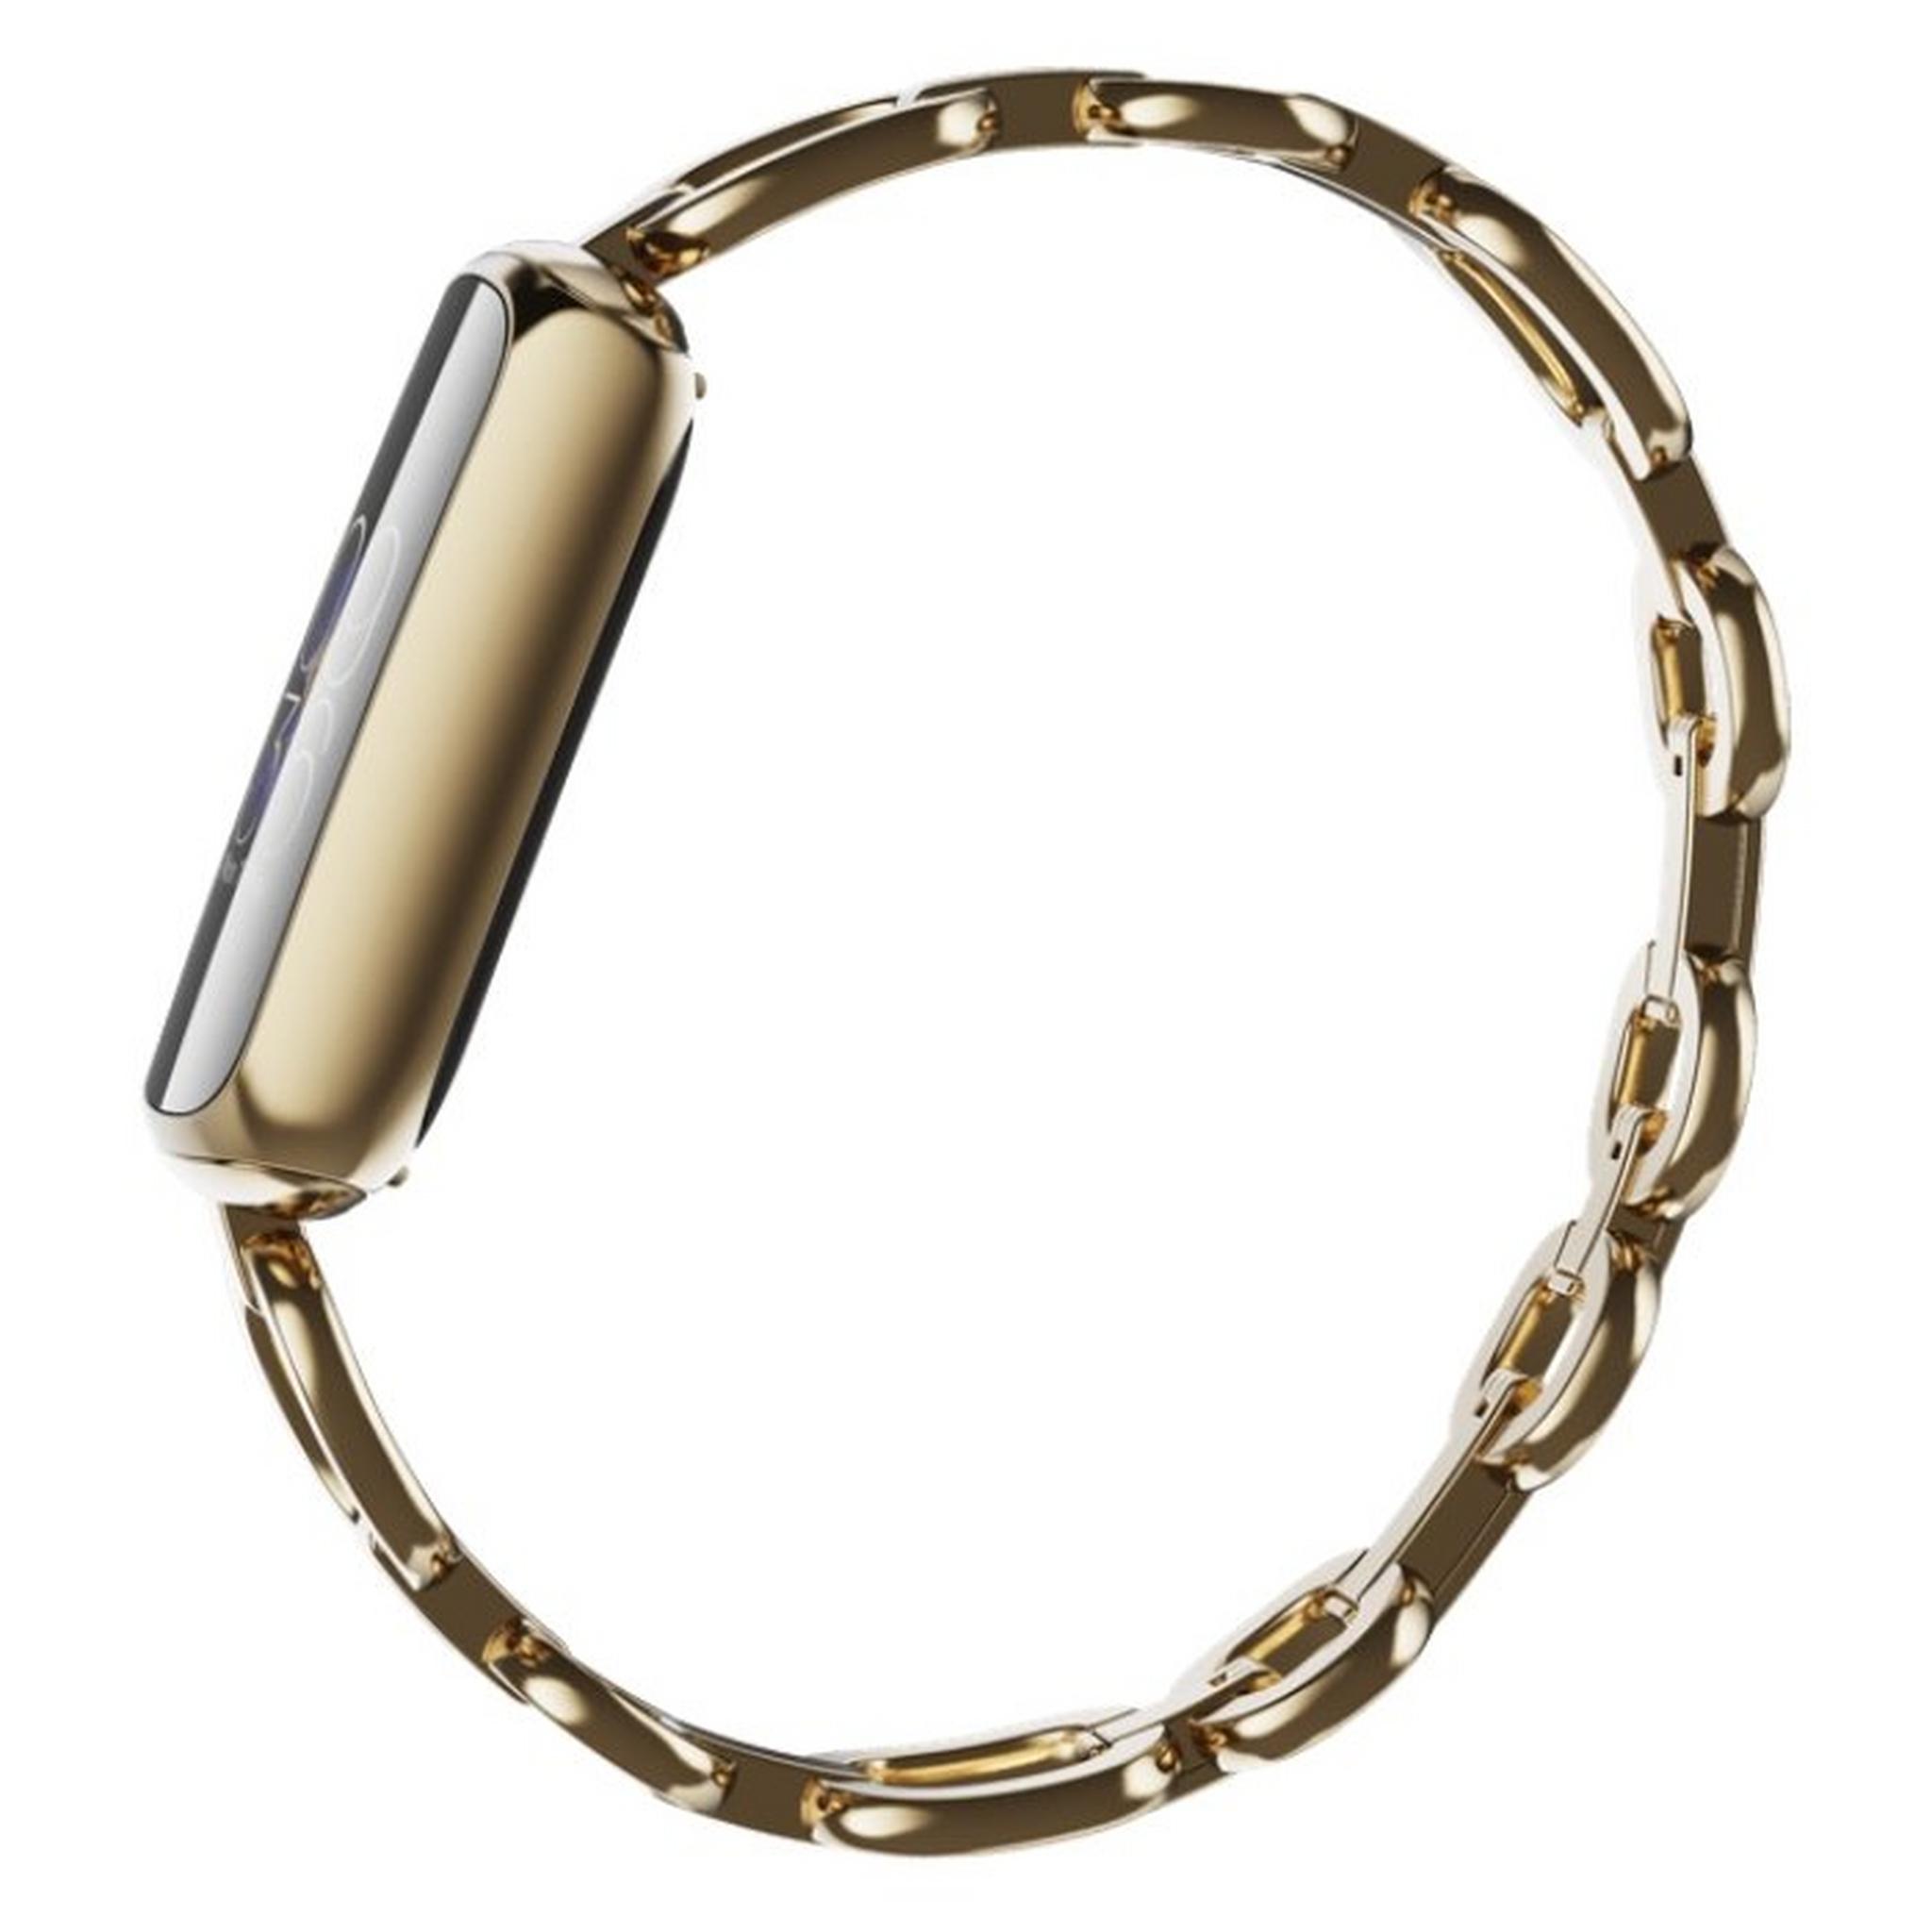 Fitbit Luxe Activity Tracker - Special Edition/ Gorjana Soft Gold